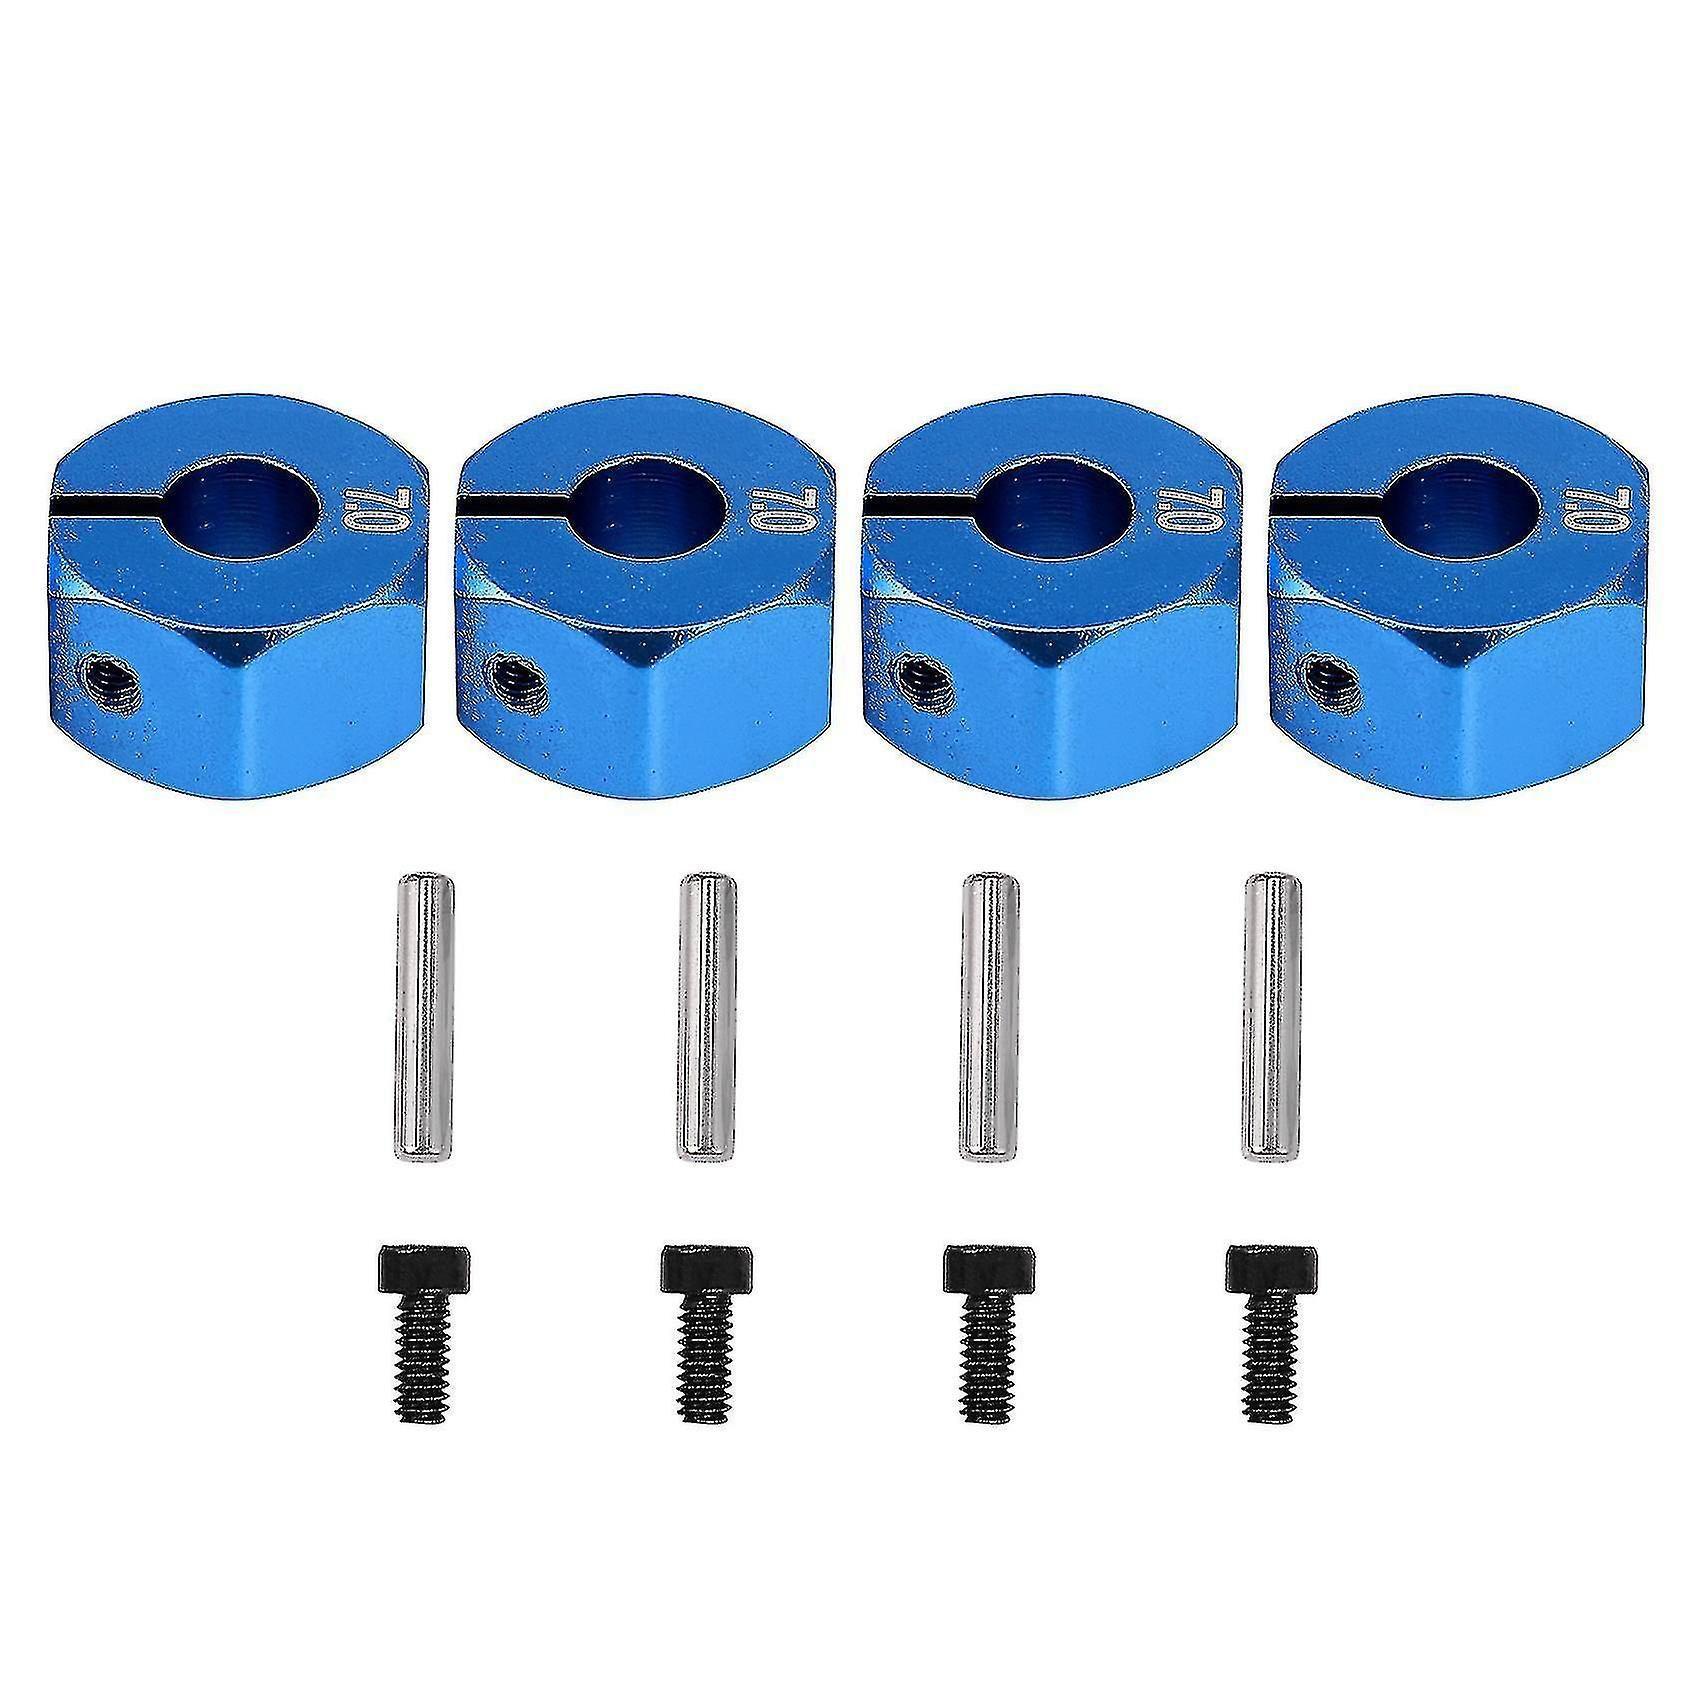 Rc Blue Aluminum 7.0 Wheel Hex 12mm Drive With Pins Screws